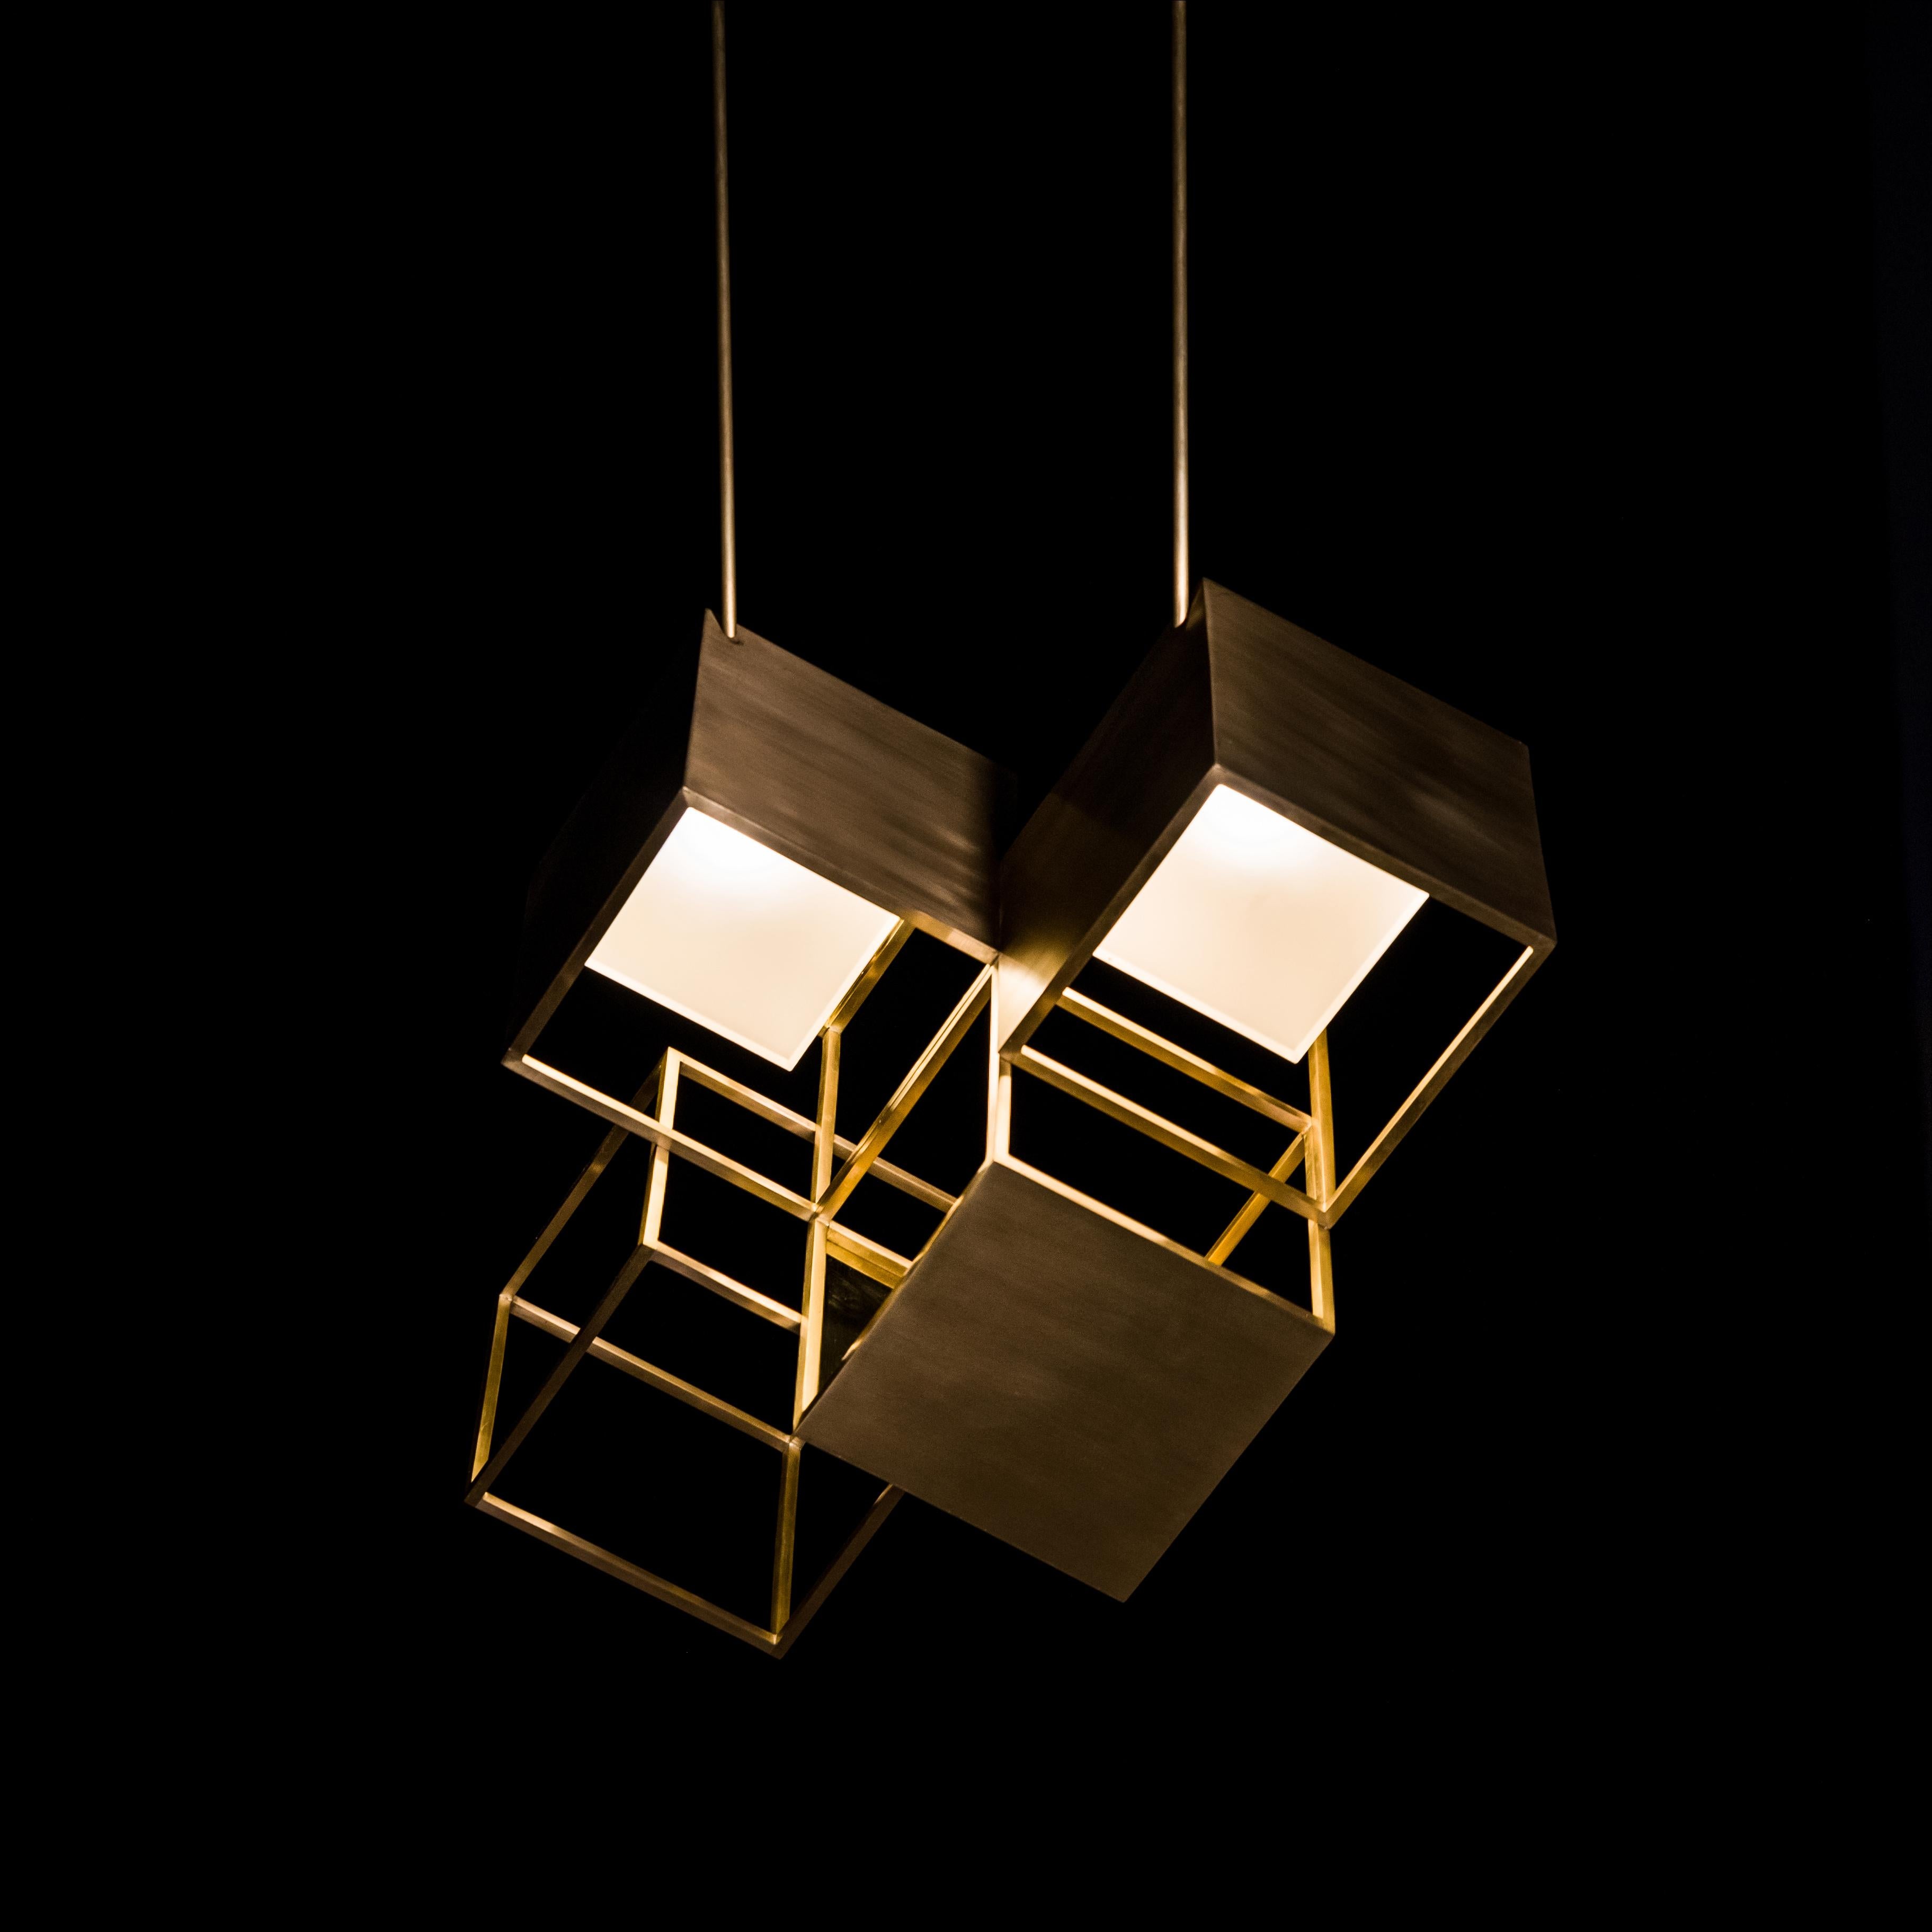 Lattis 4 by Diaphan Studio

Lattis is conceived as a light piece of jewelry for the interior. It’s something personal, emotional, and fills the space with a strong aesthetic and a dynamic atmosphere.

Made of standardised basic units, Lattis can be